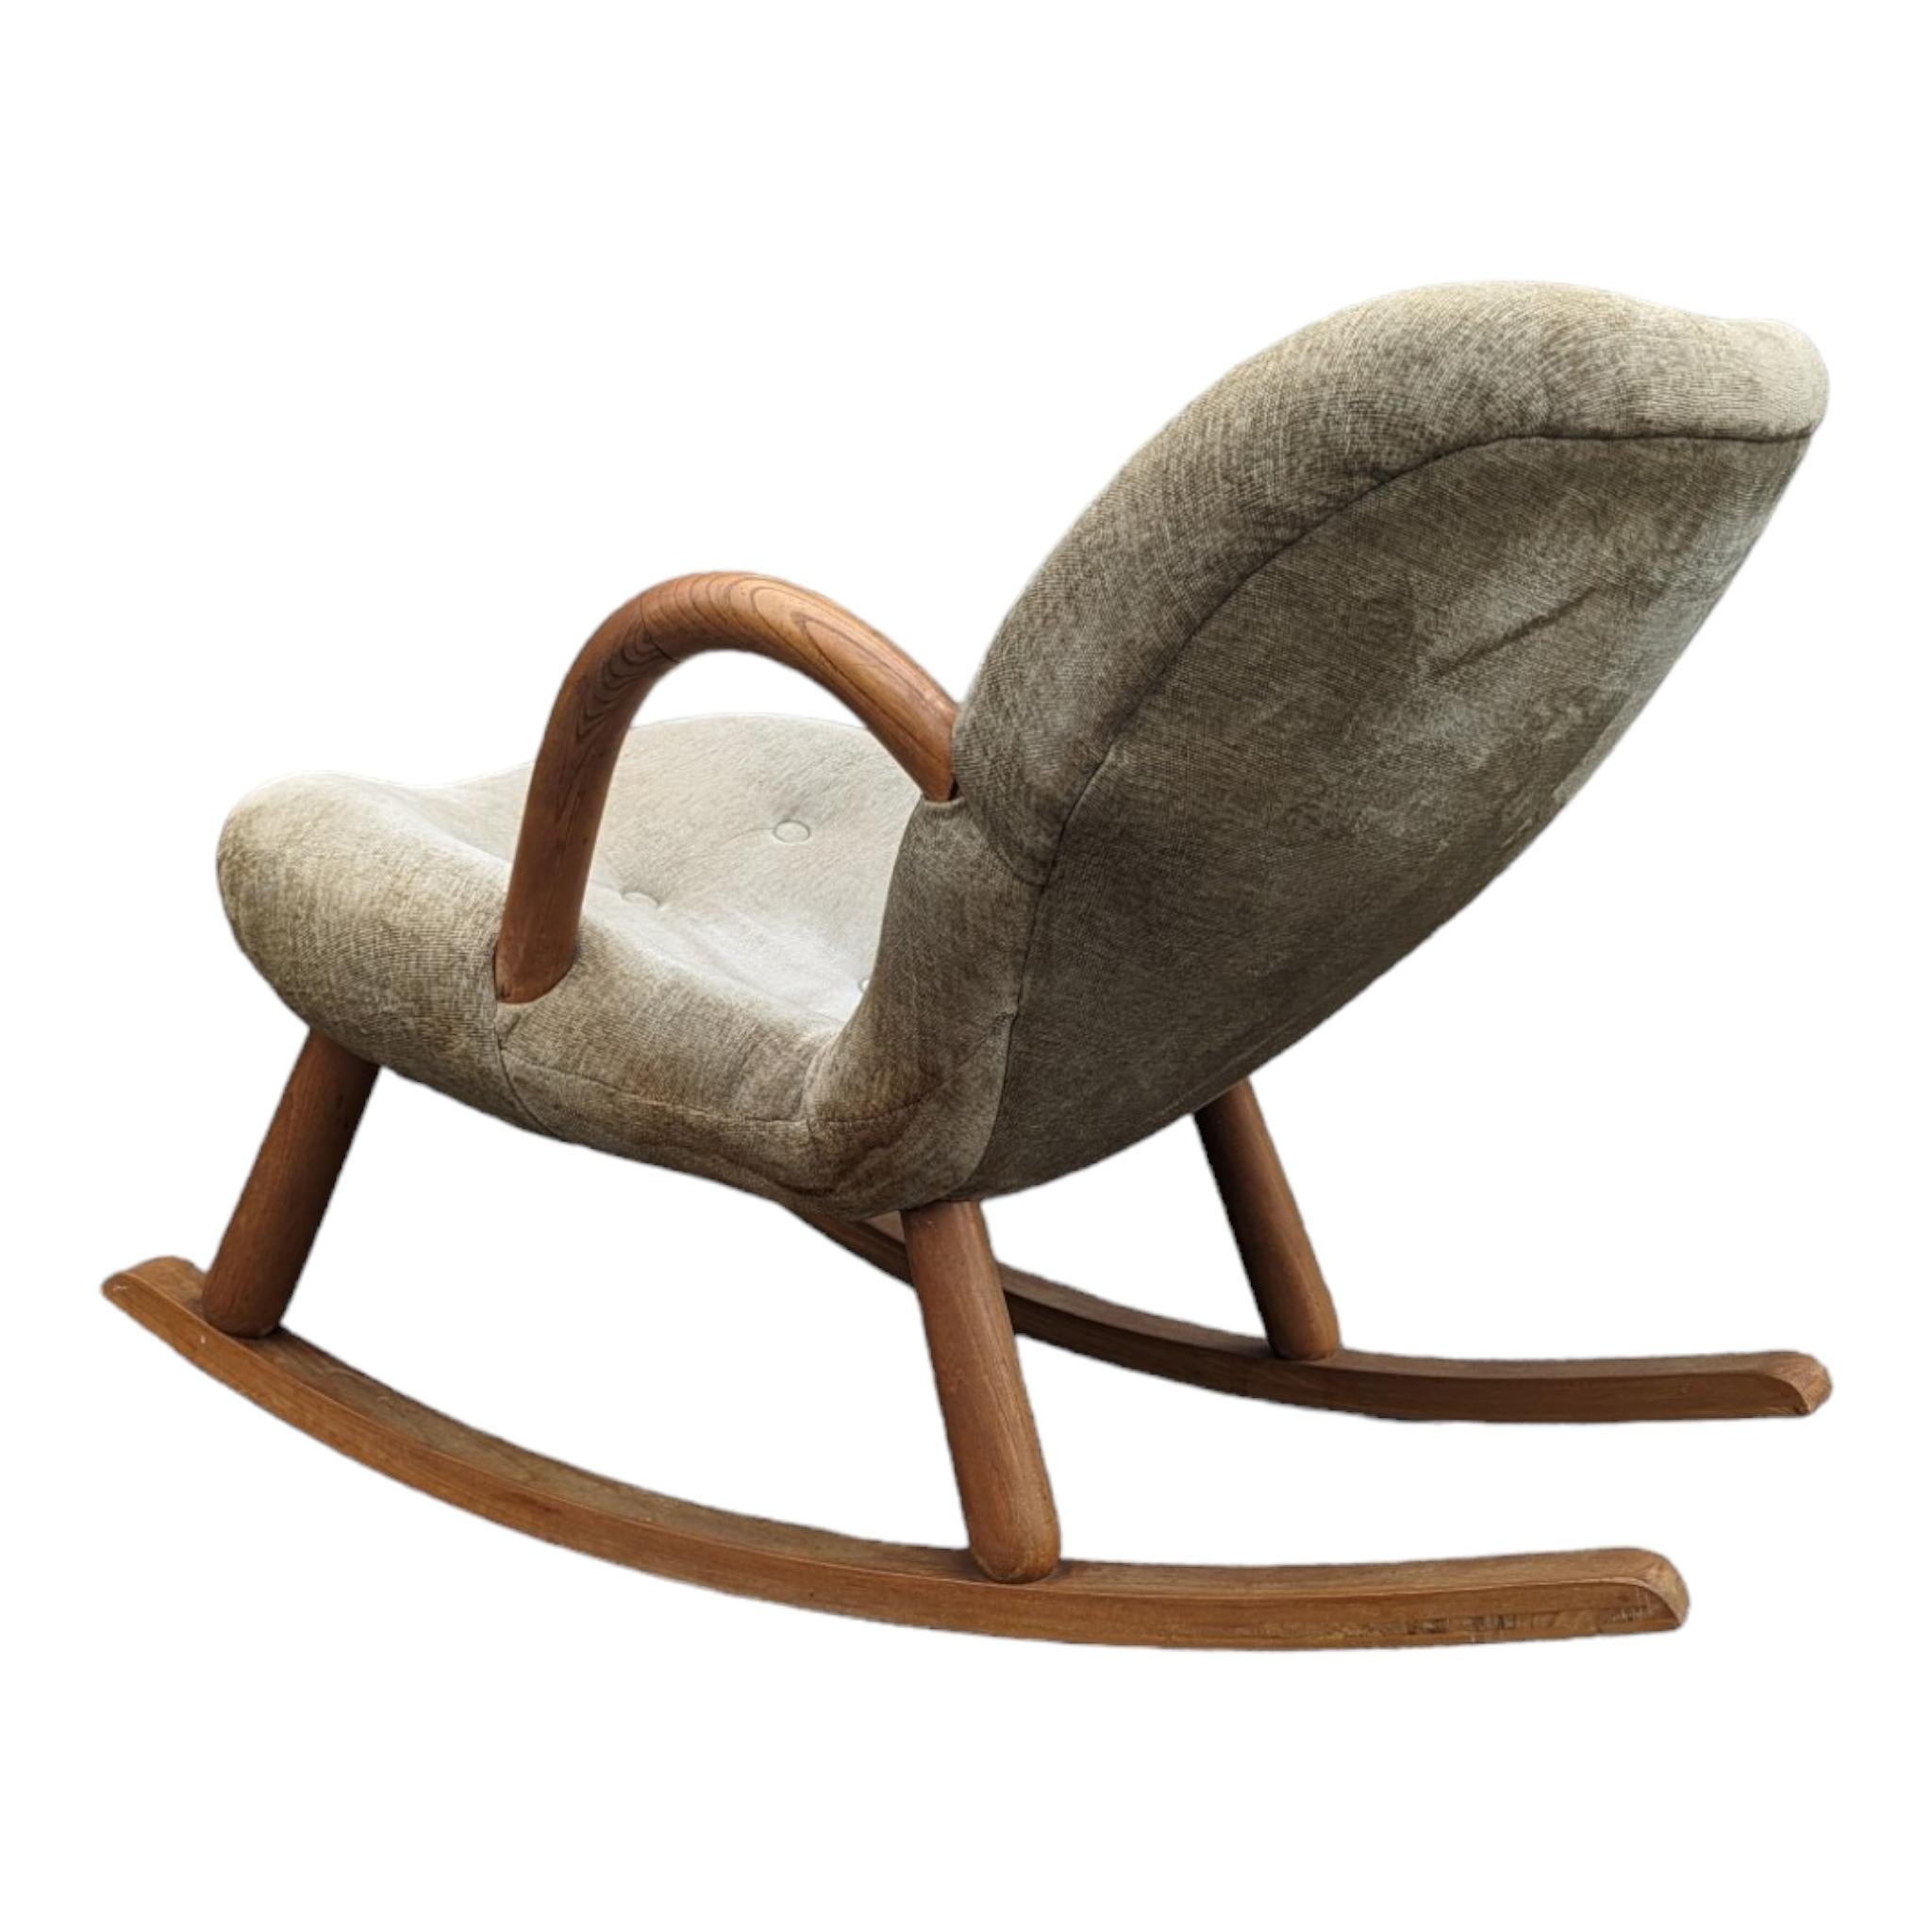 Rare Arnold Madsen Attributed Clam Rocking Chair circa 1960s For Sale 4